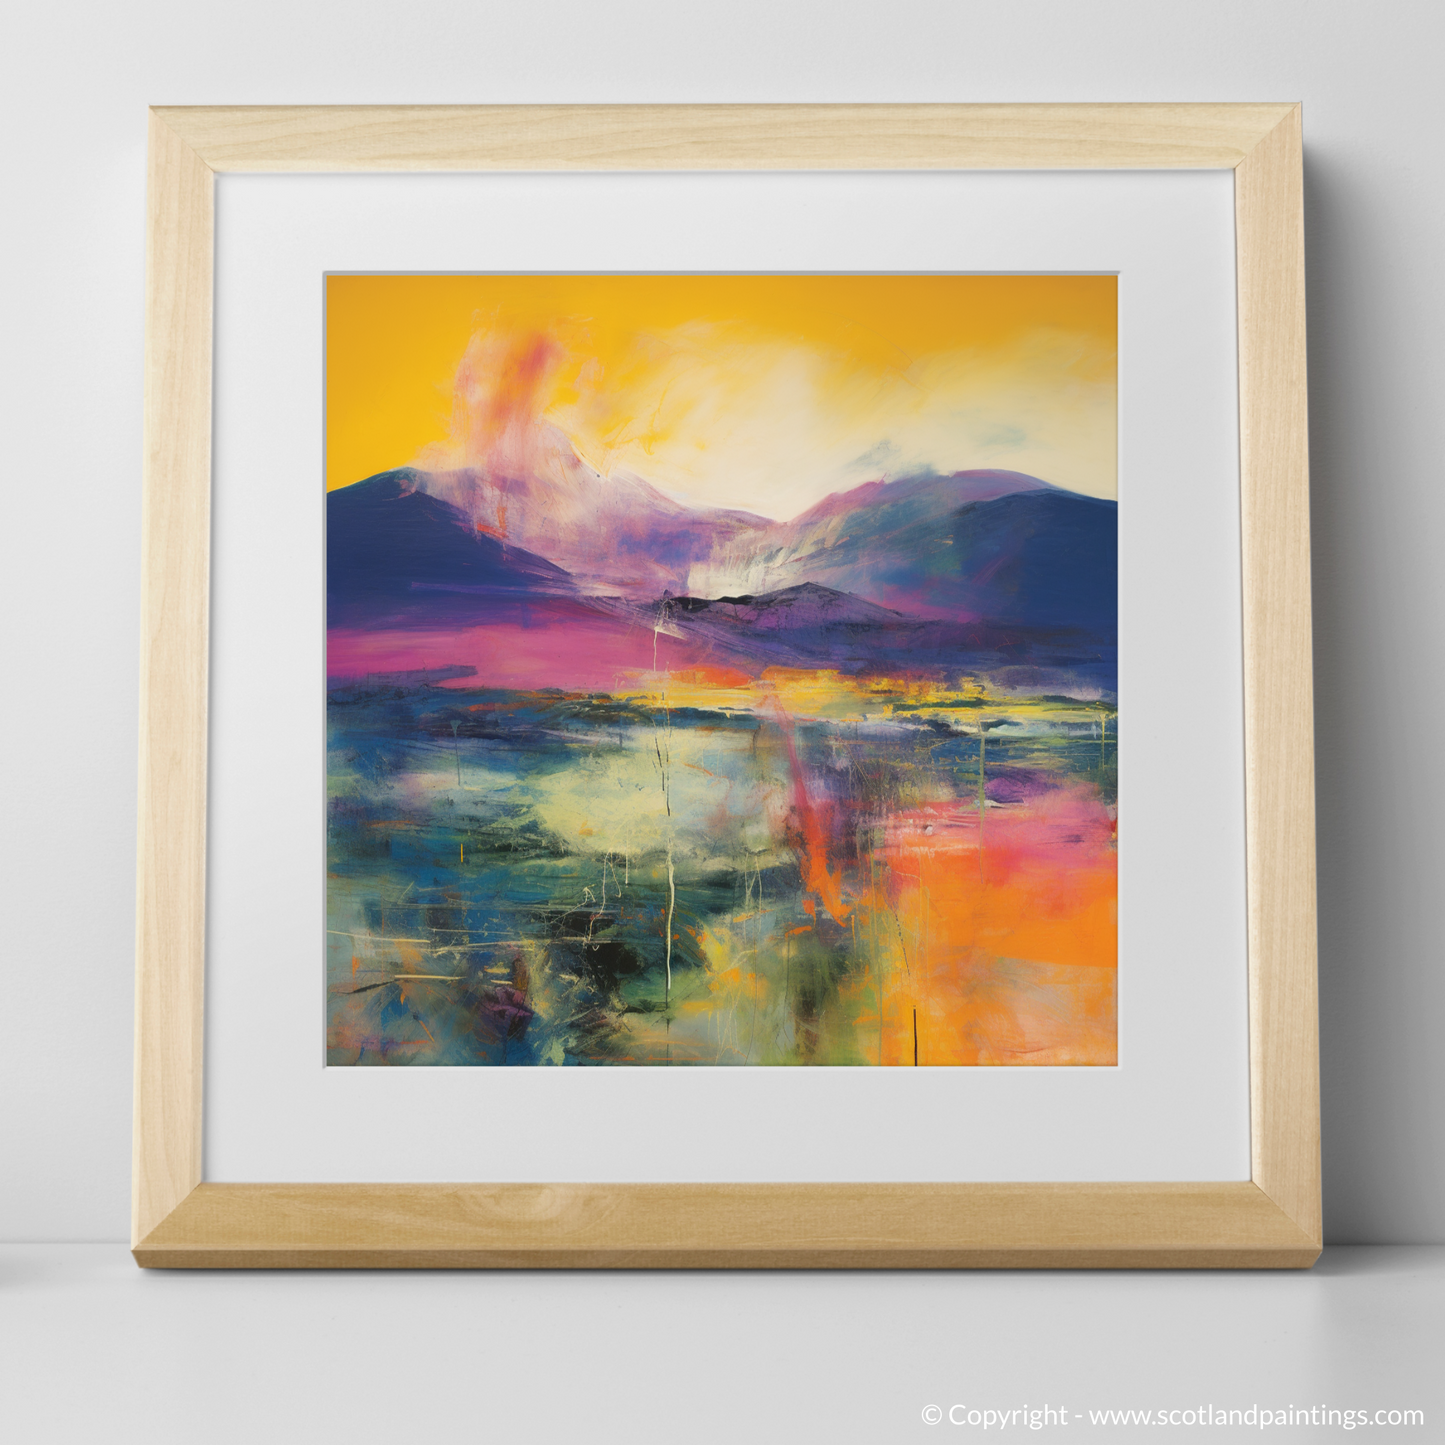 Art Print of Ben Lawers, Perth and Kinross with a natural frame